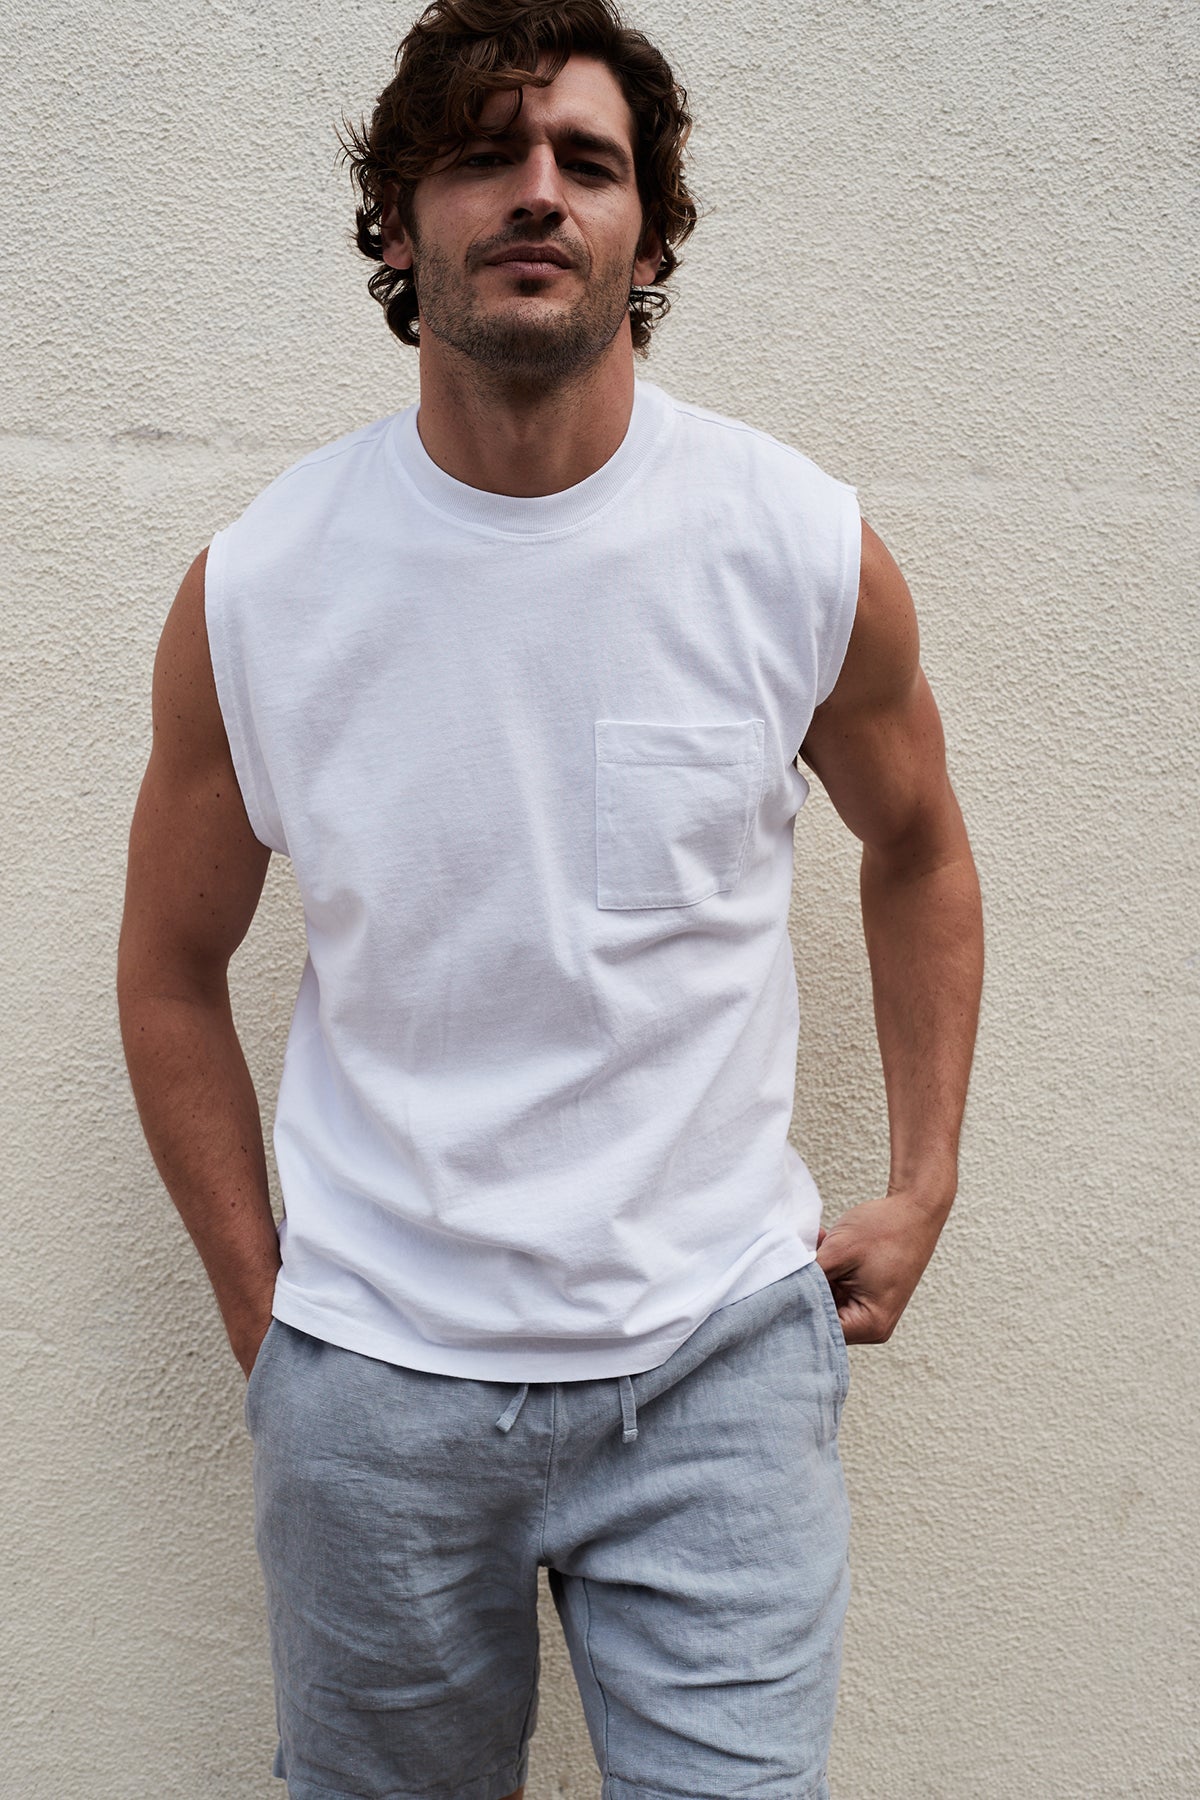 Bodhi Crew Neck Muscle Tee in White with Jonathan Short in Chambray Front-24705622606017